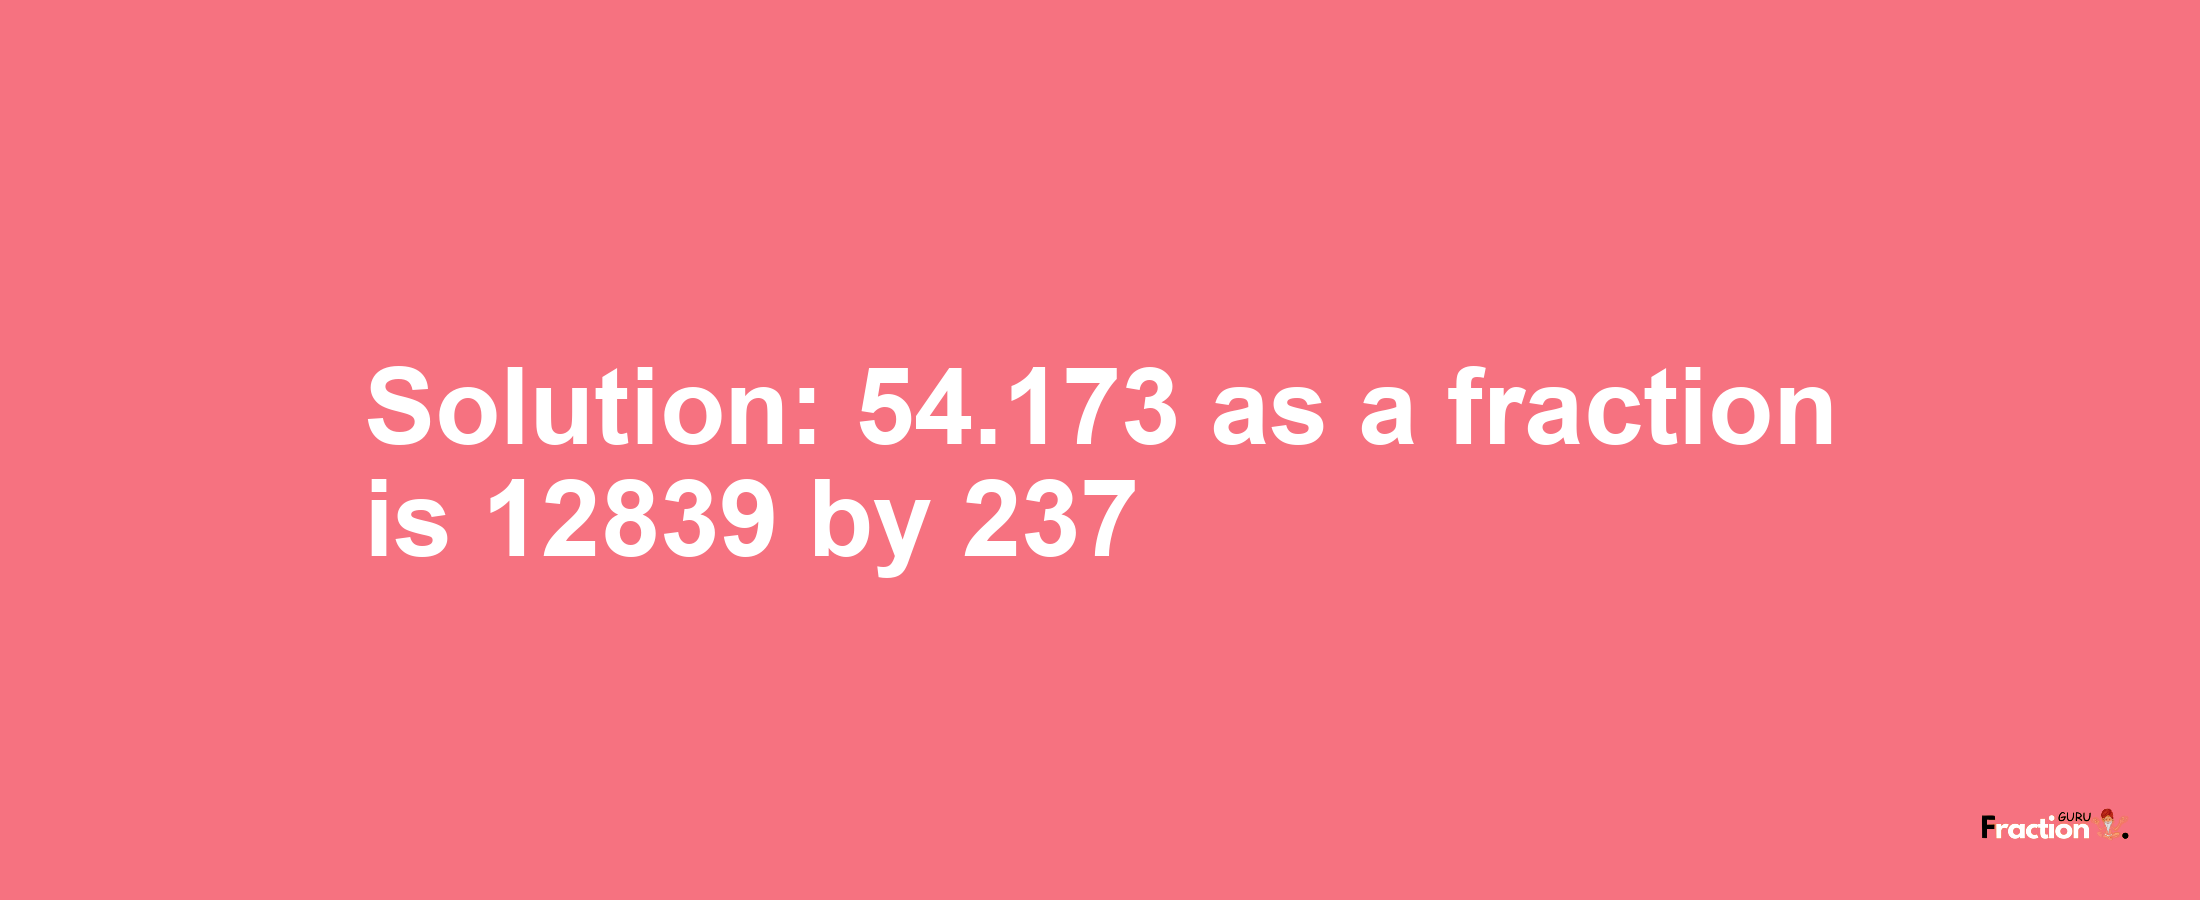 Solution:54.173 as a fraction is 12839/237